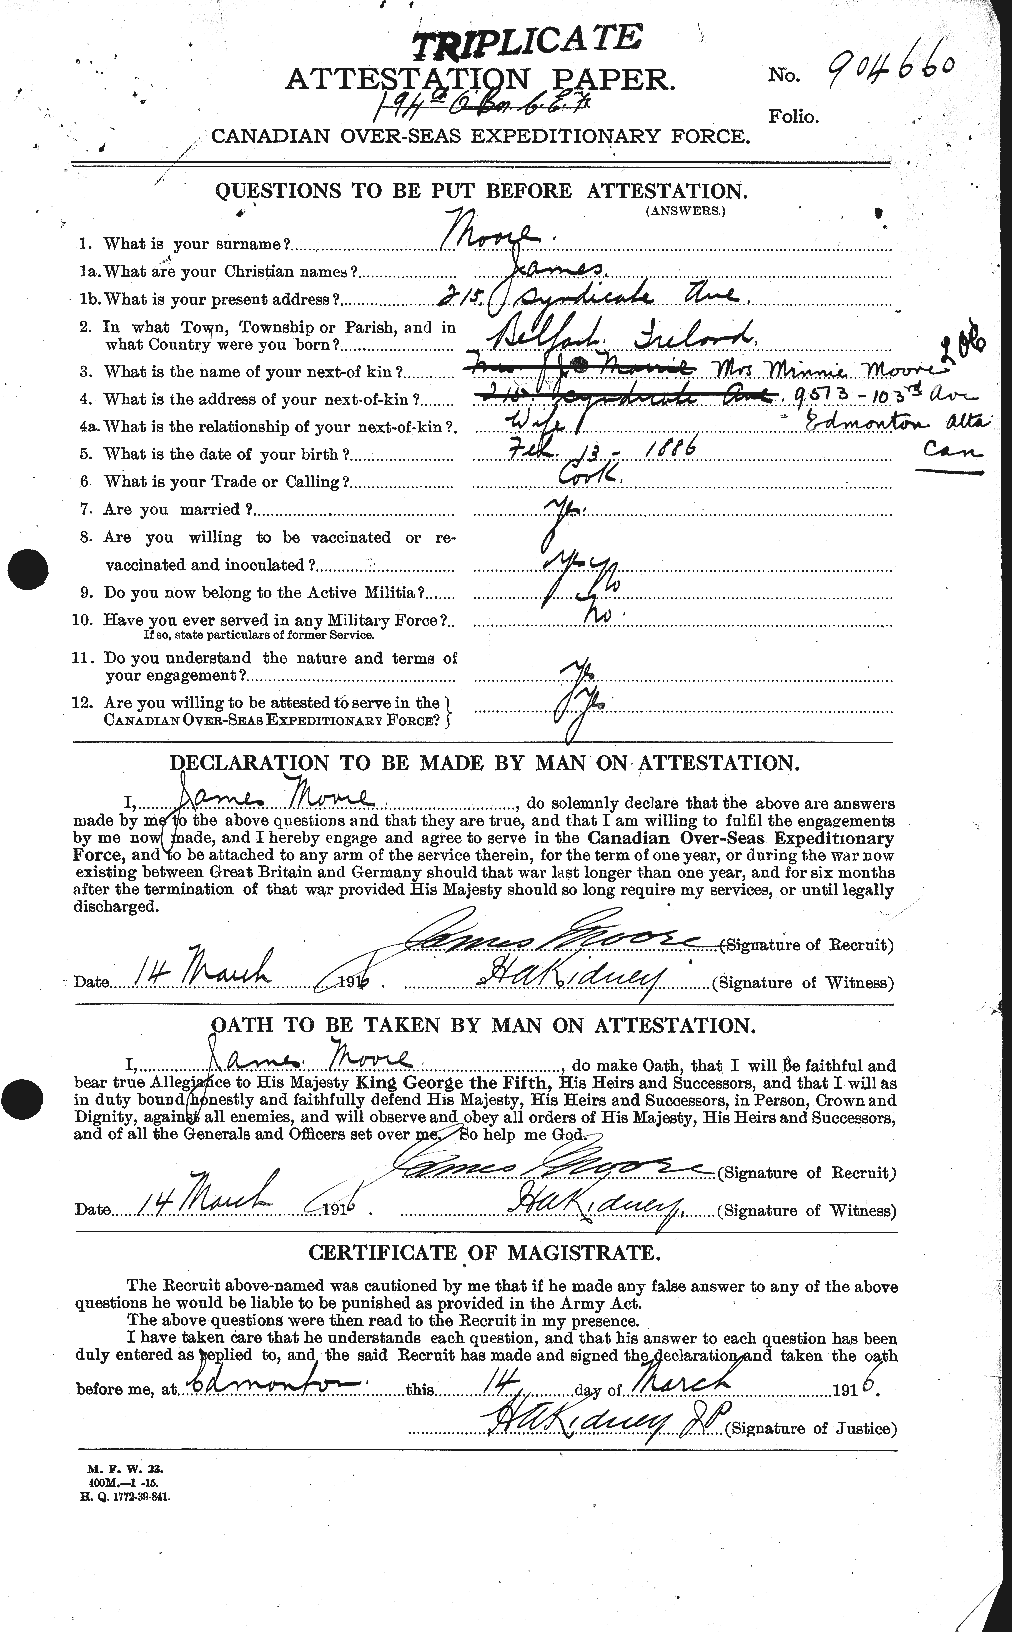 Personnel Records of the First World War - CEF 502200a